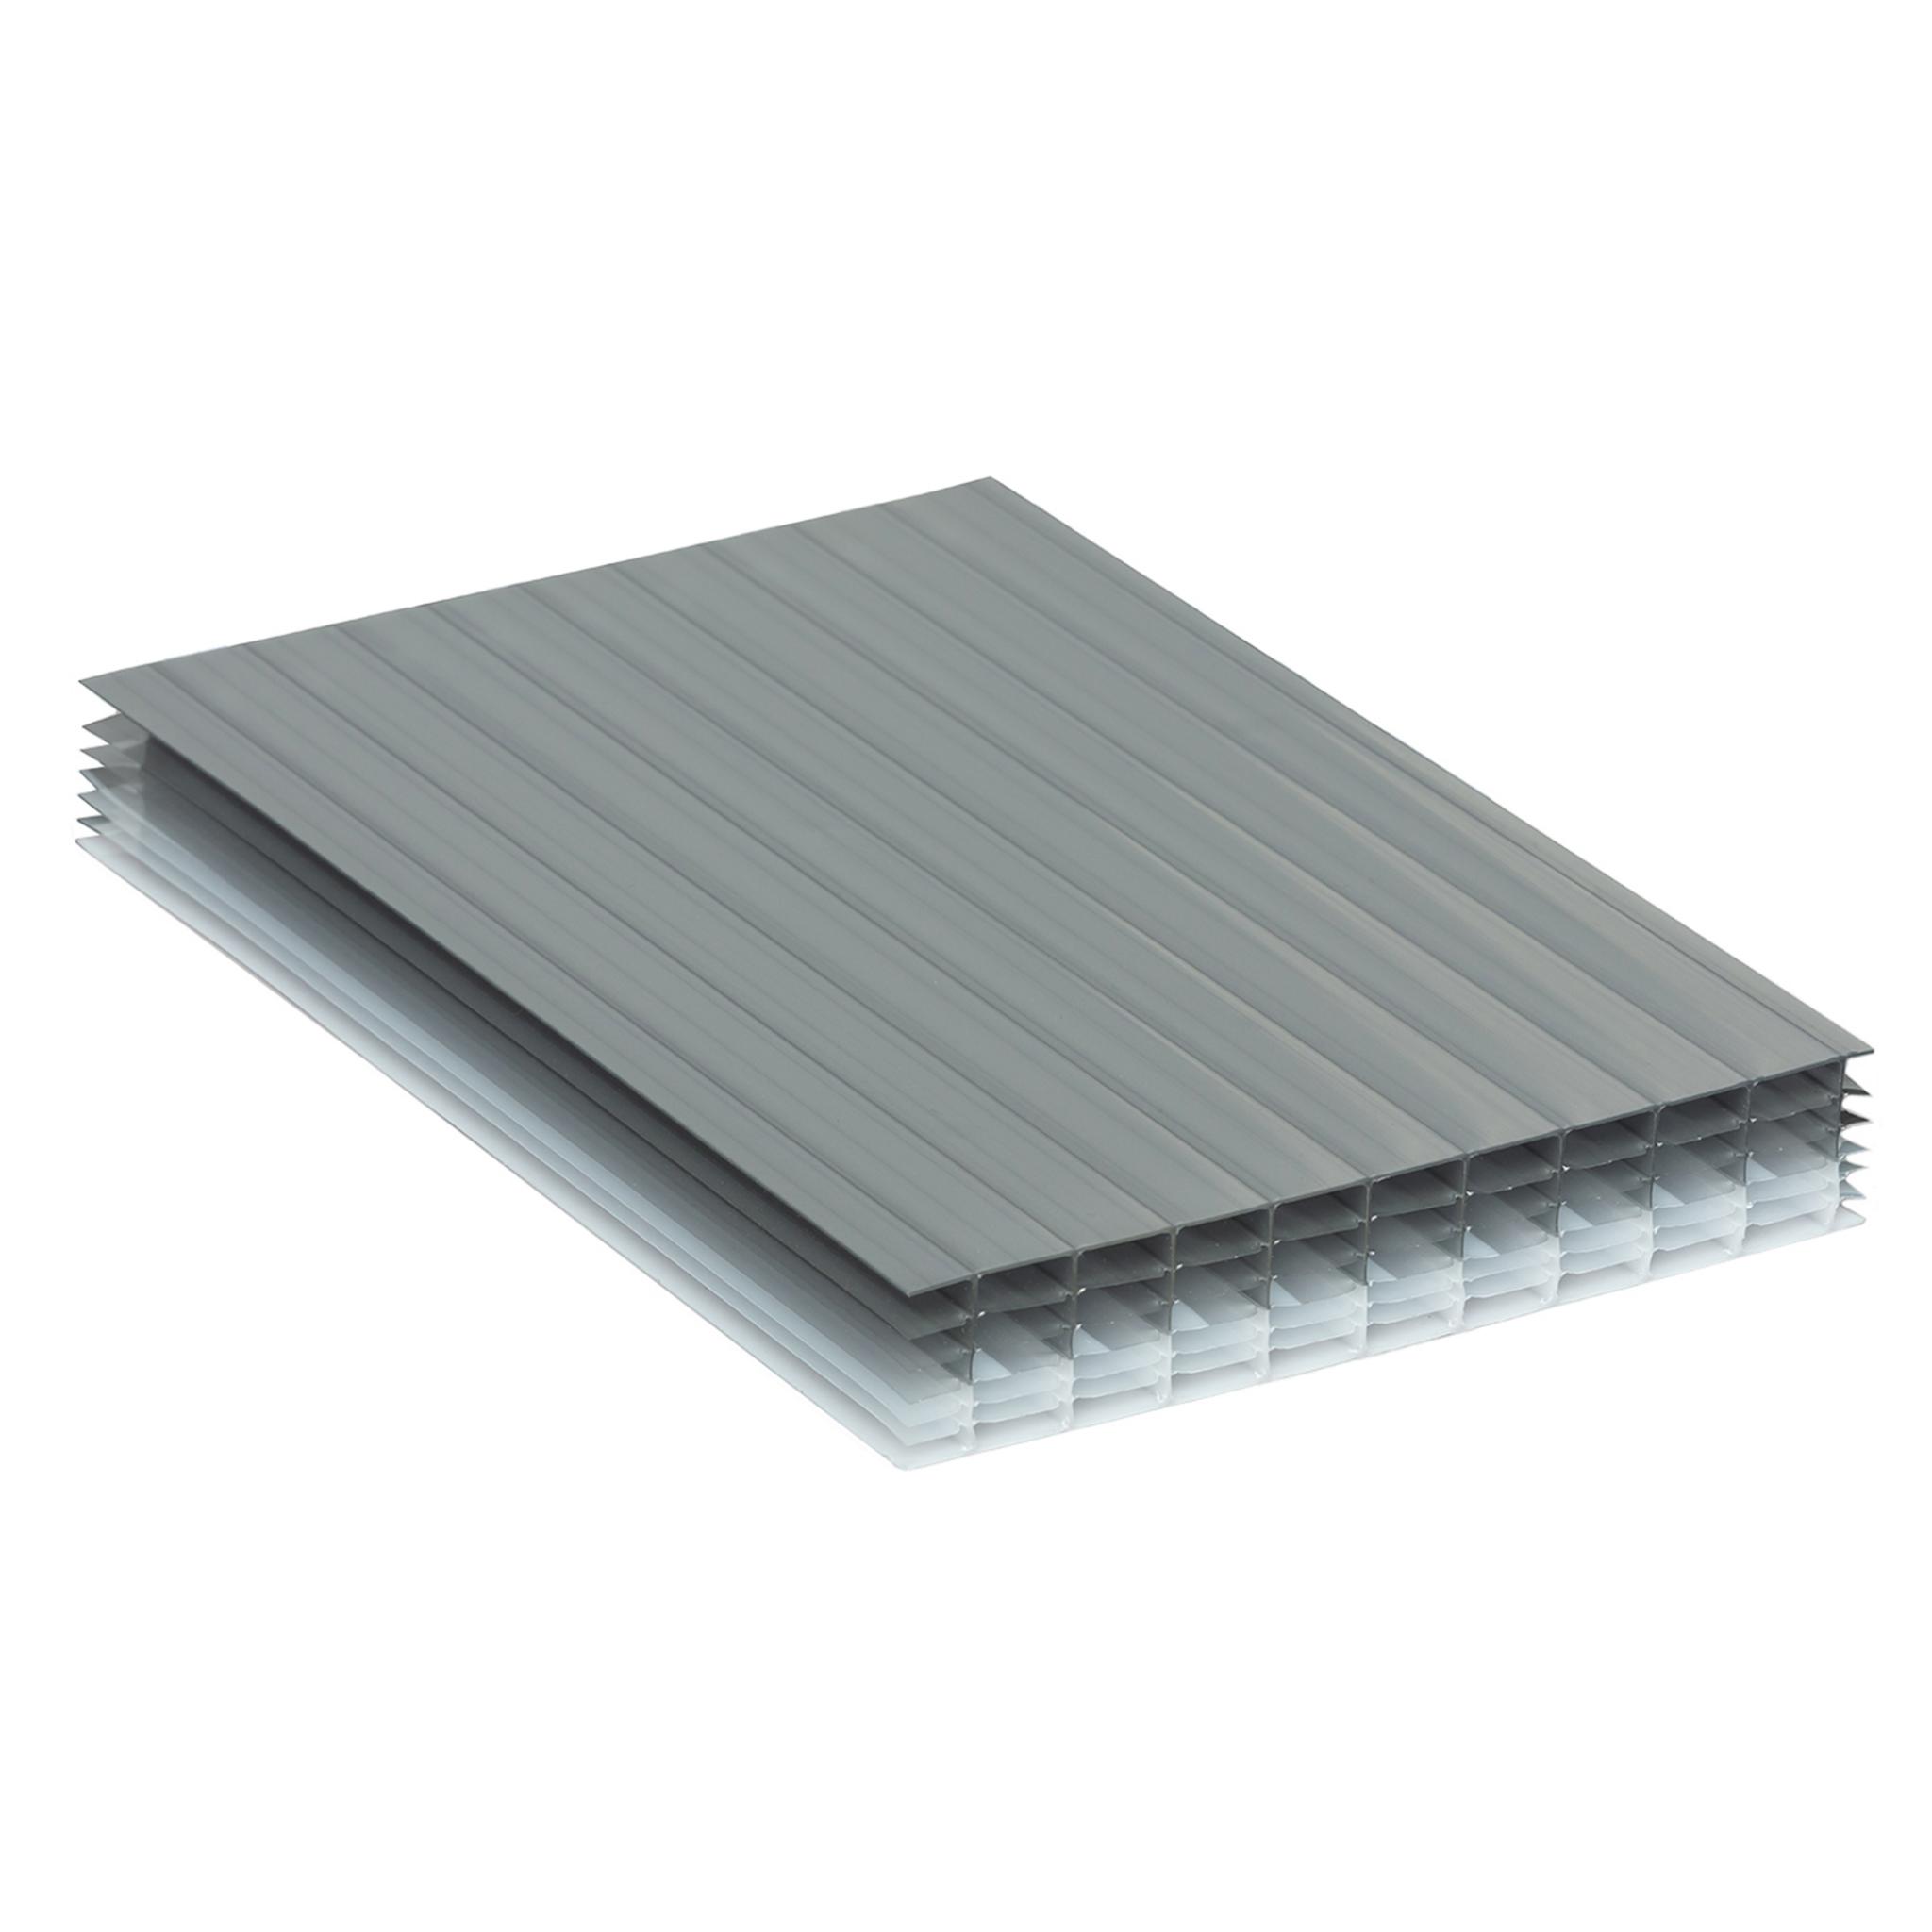 35mm Heatguard Multiwall Polycarbonate - Cut to Size - Sqm. Rate